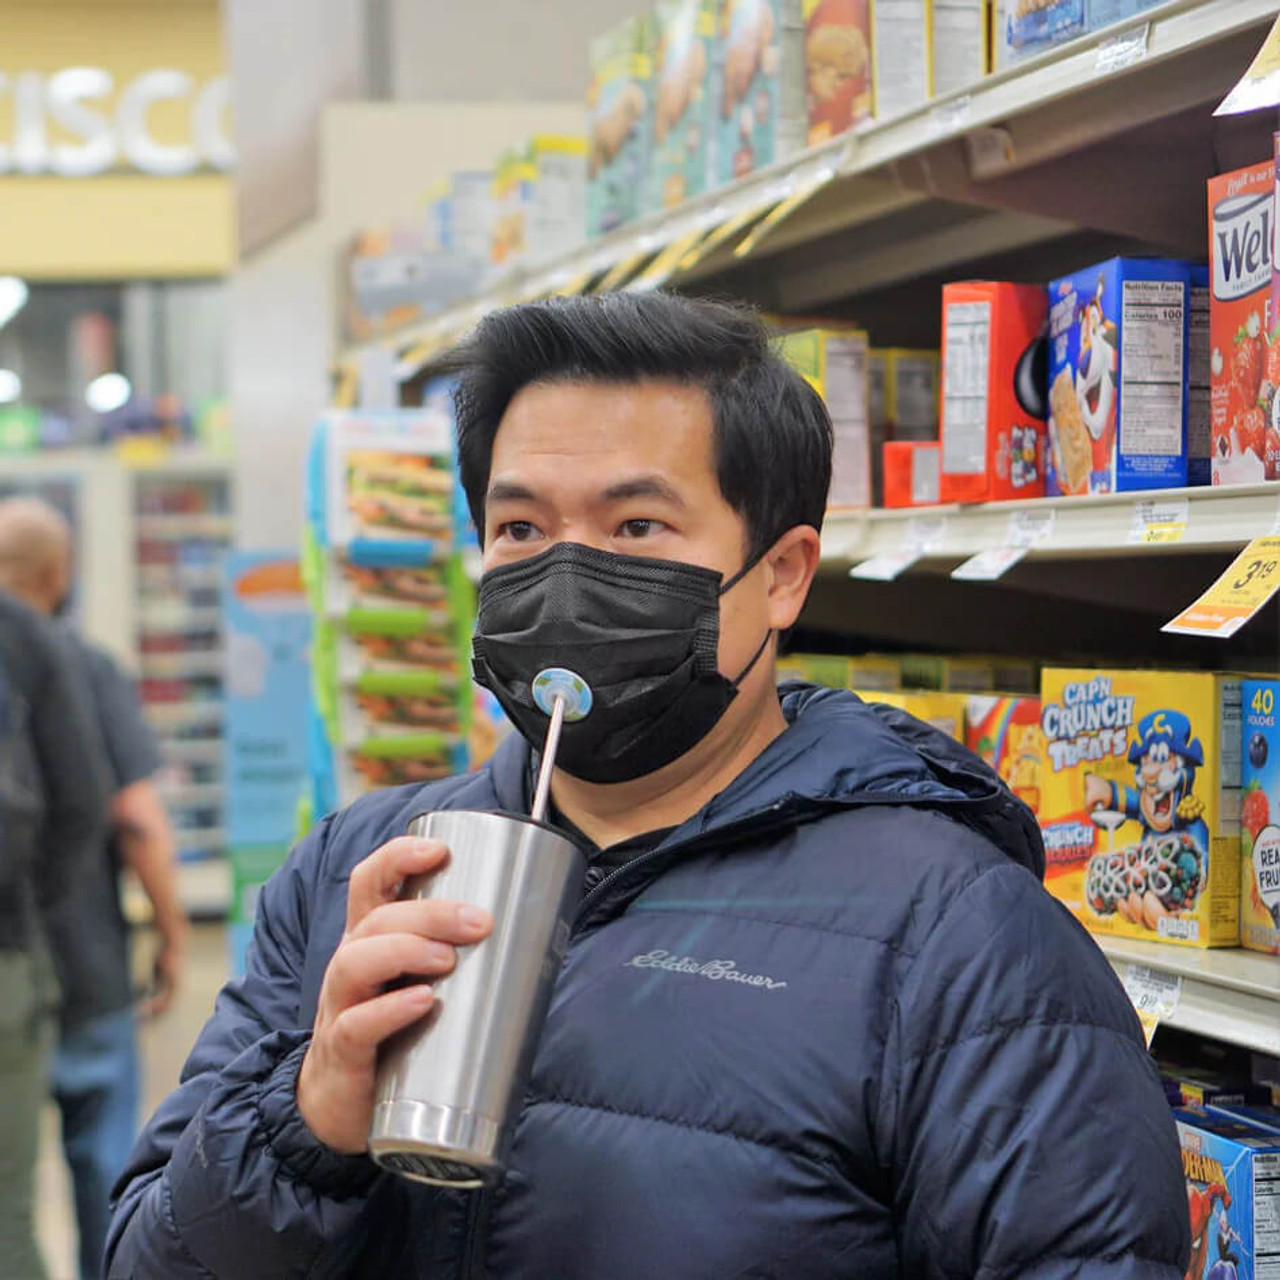 SIP Airtight Drinking Valve: Safely drink through a mask with a straw